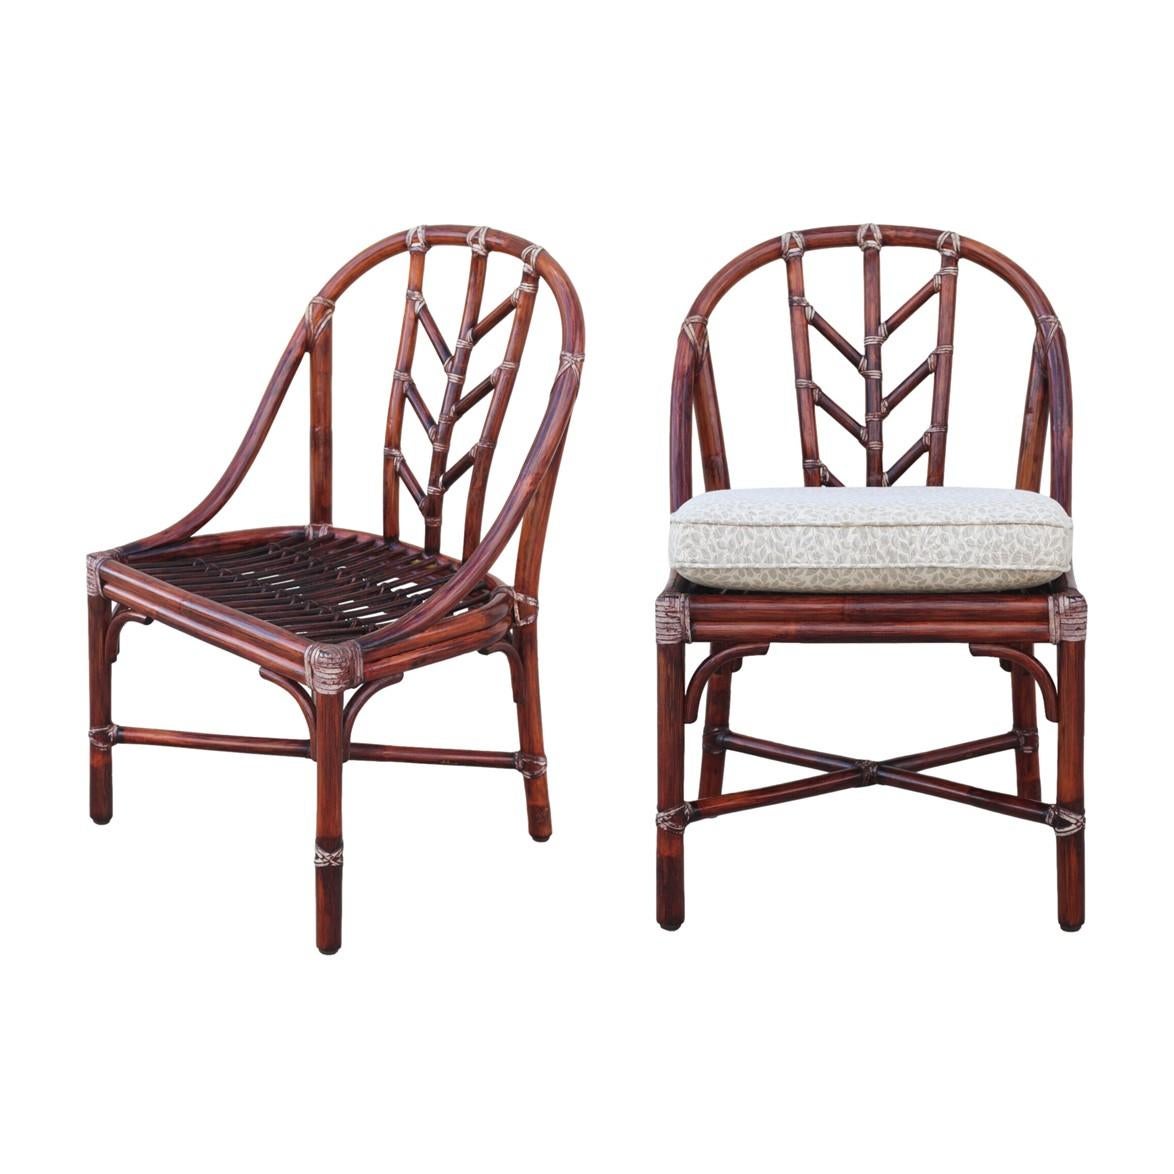 A beautiful pair of M-74 dining chairs designed by Elinor McGuire for McGuire San Francisco. Chairs have the original finish and feature McGuire’s signature woven rawhide bindings with an aged patina, a stick deck and generous seats. Chair splats